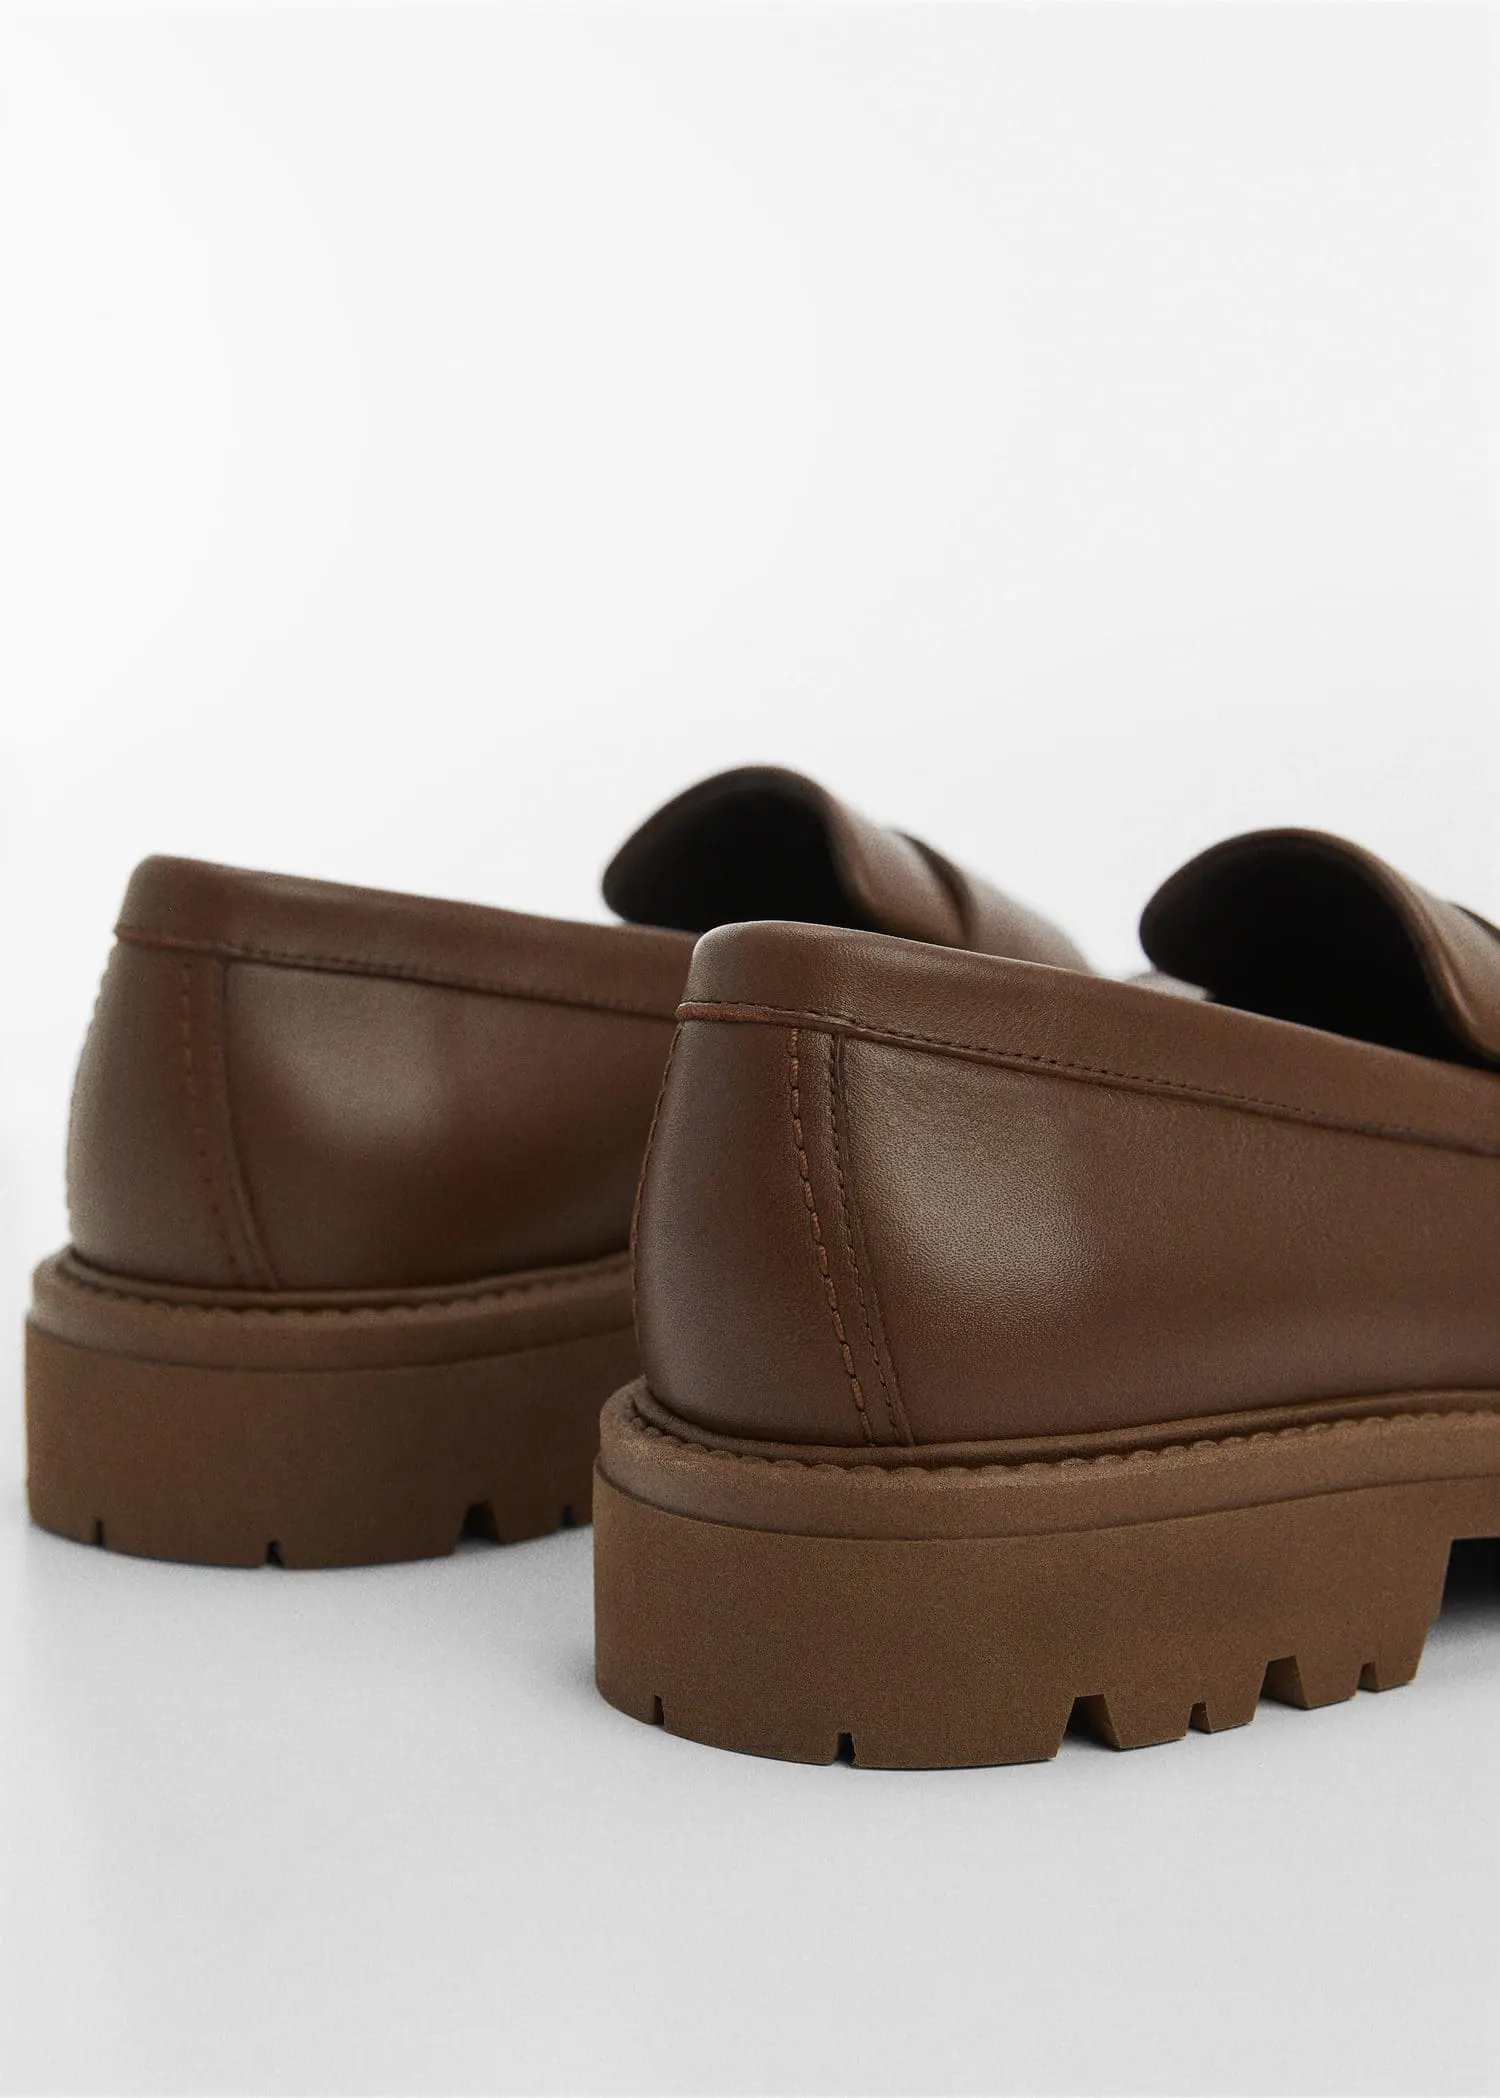 Mango Leather moccasin with track sole. 2